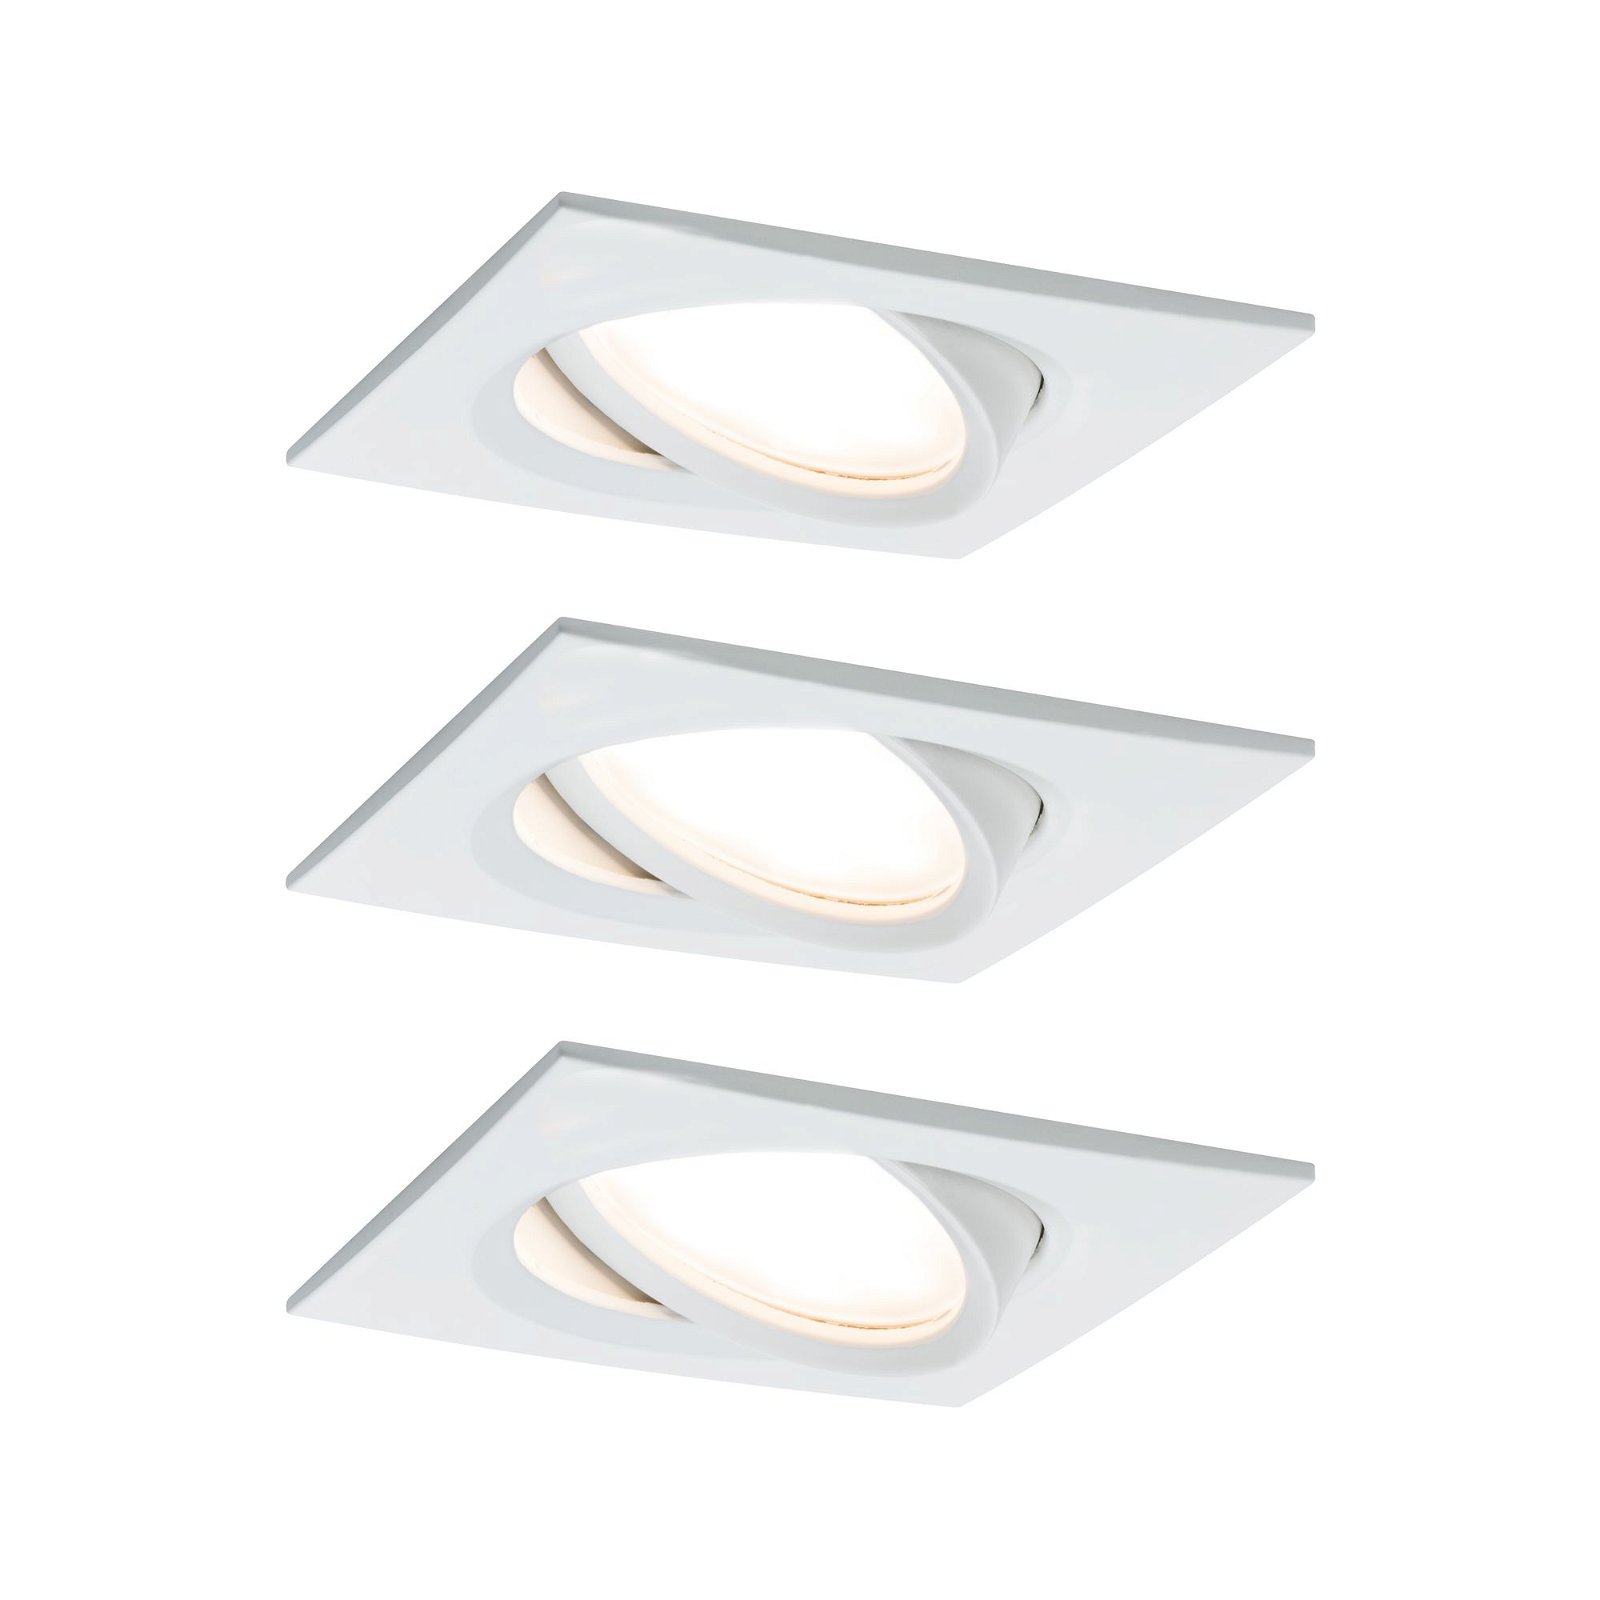 Recessed spotlight – solutions Premium from light directly Nova manufacturer Plus the